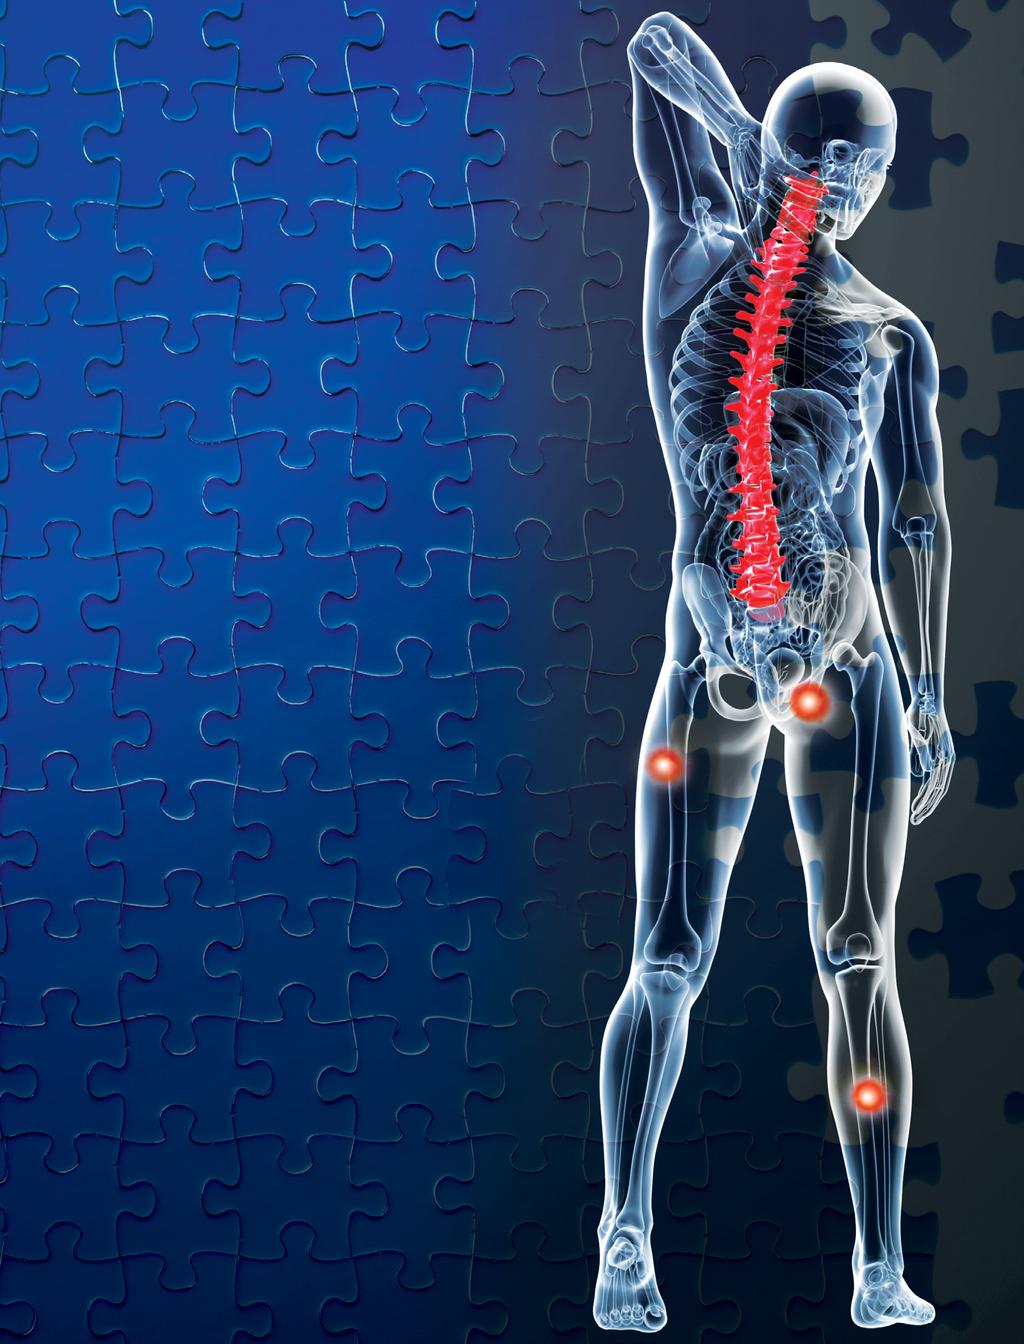 2015 Musculoskeletal Conference An interprofessional approach to back pain assessment and